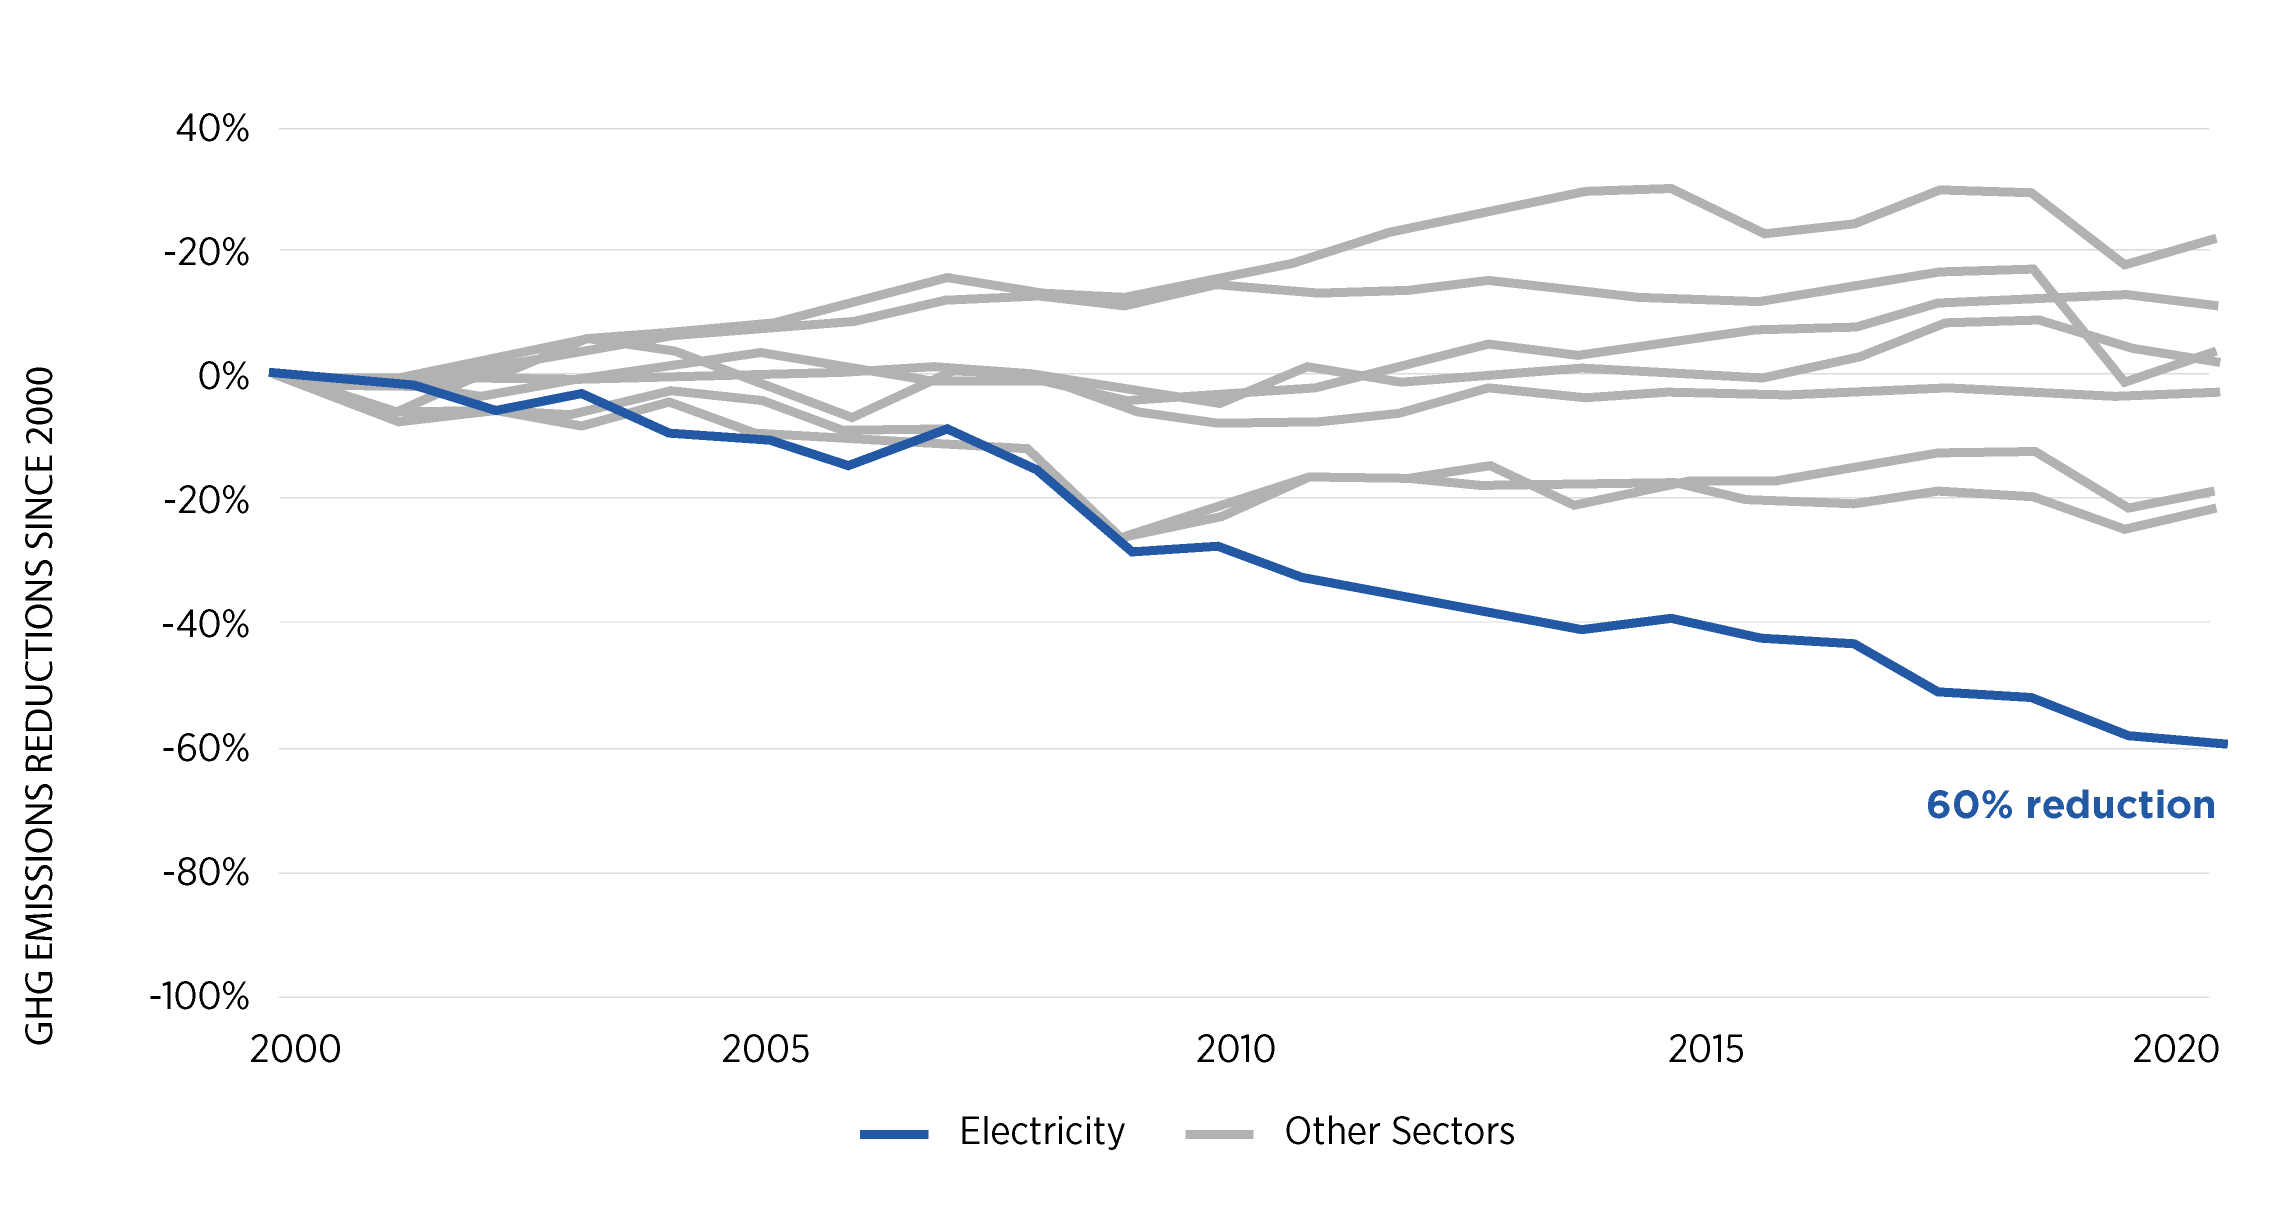 A line chart illustrating Canada’s sectoral emissions trajectories